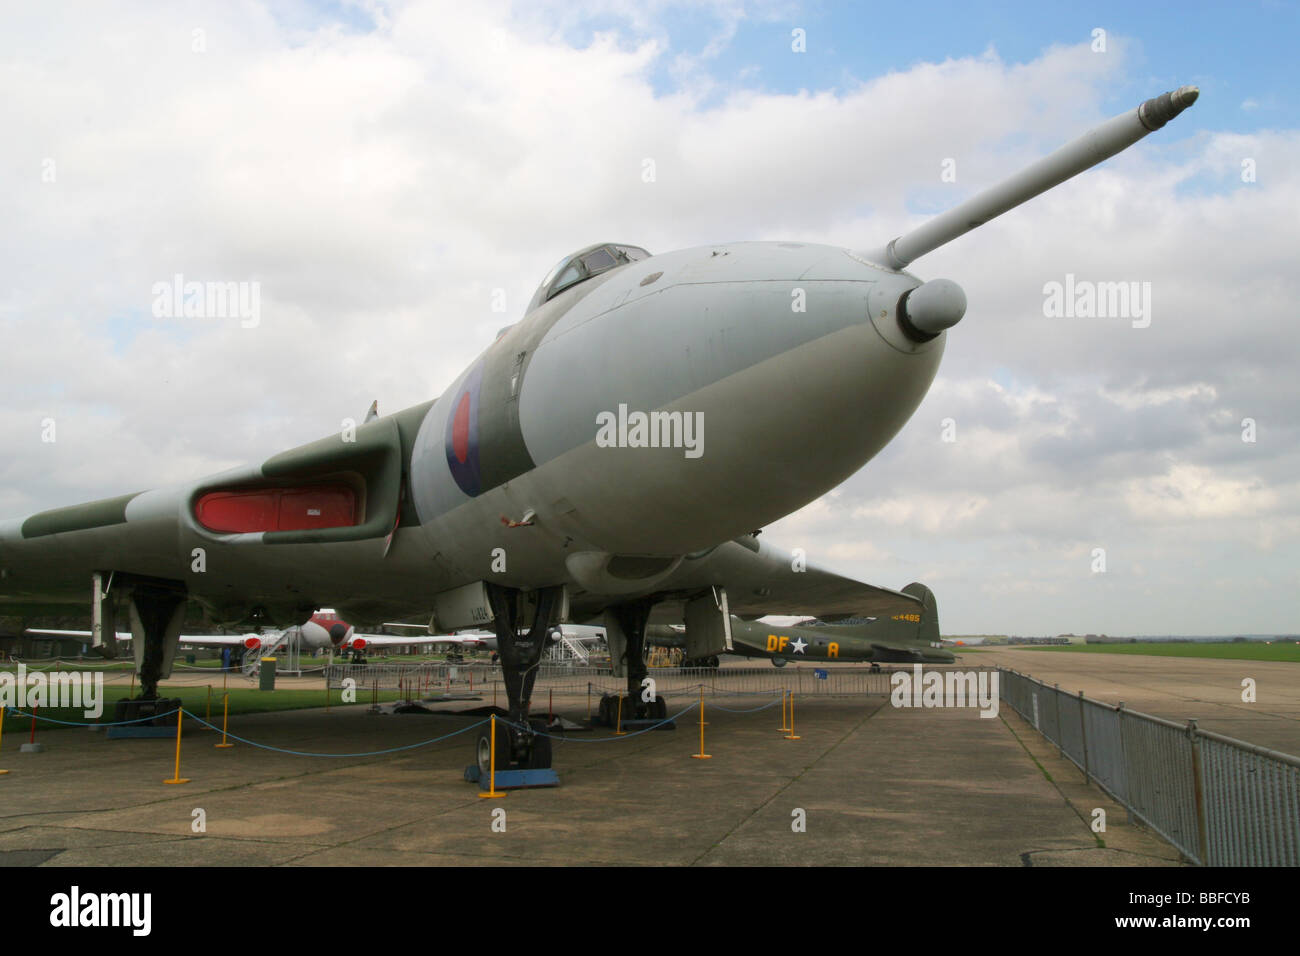 Avro vulcan delta wing subsonic jet bomber on the ground Stock Photo